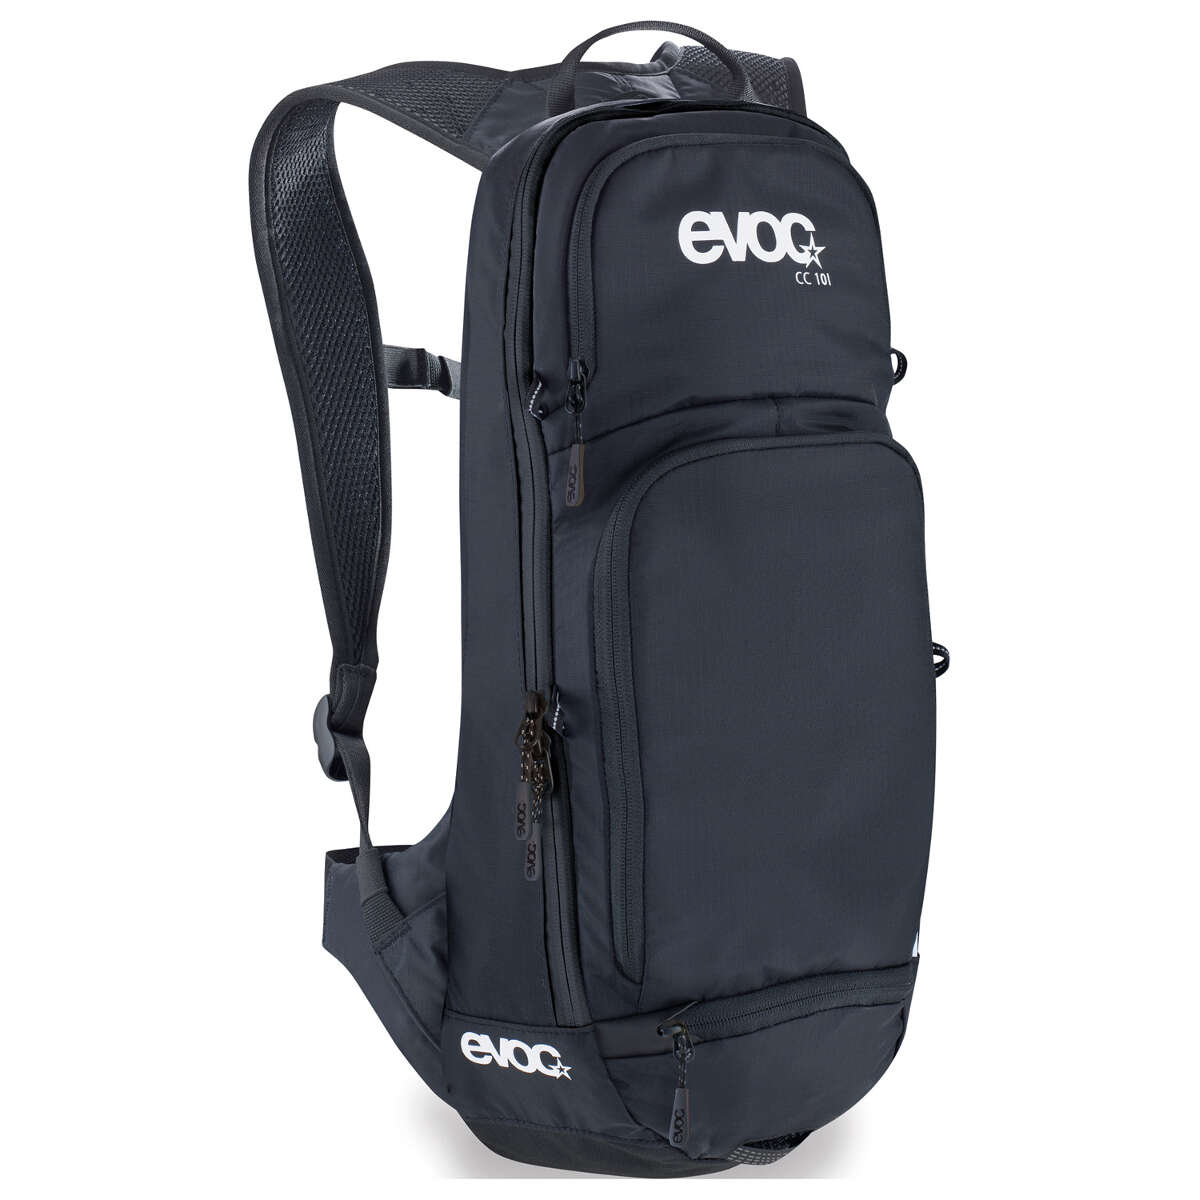 Evoc Backpack with Hydration System Compartment Cross Country Black, 10 Liter